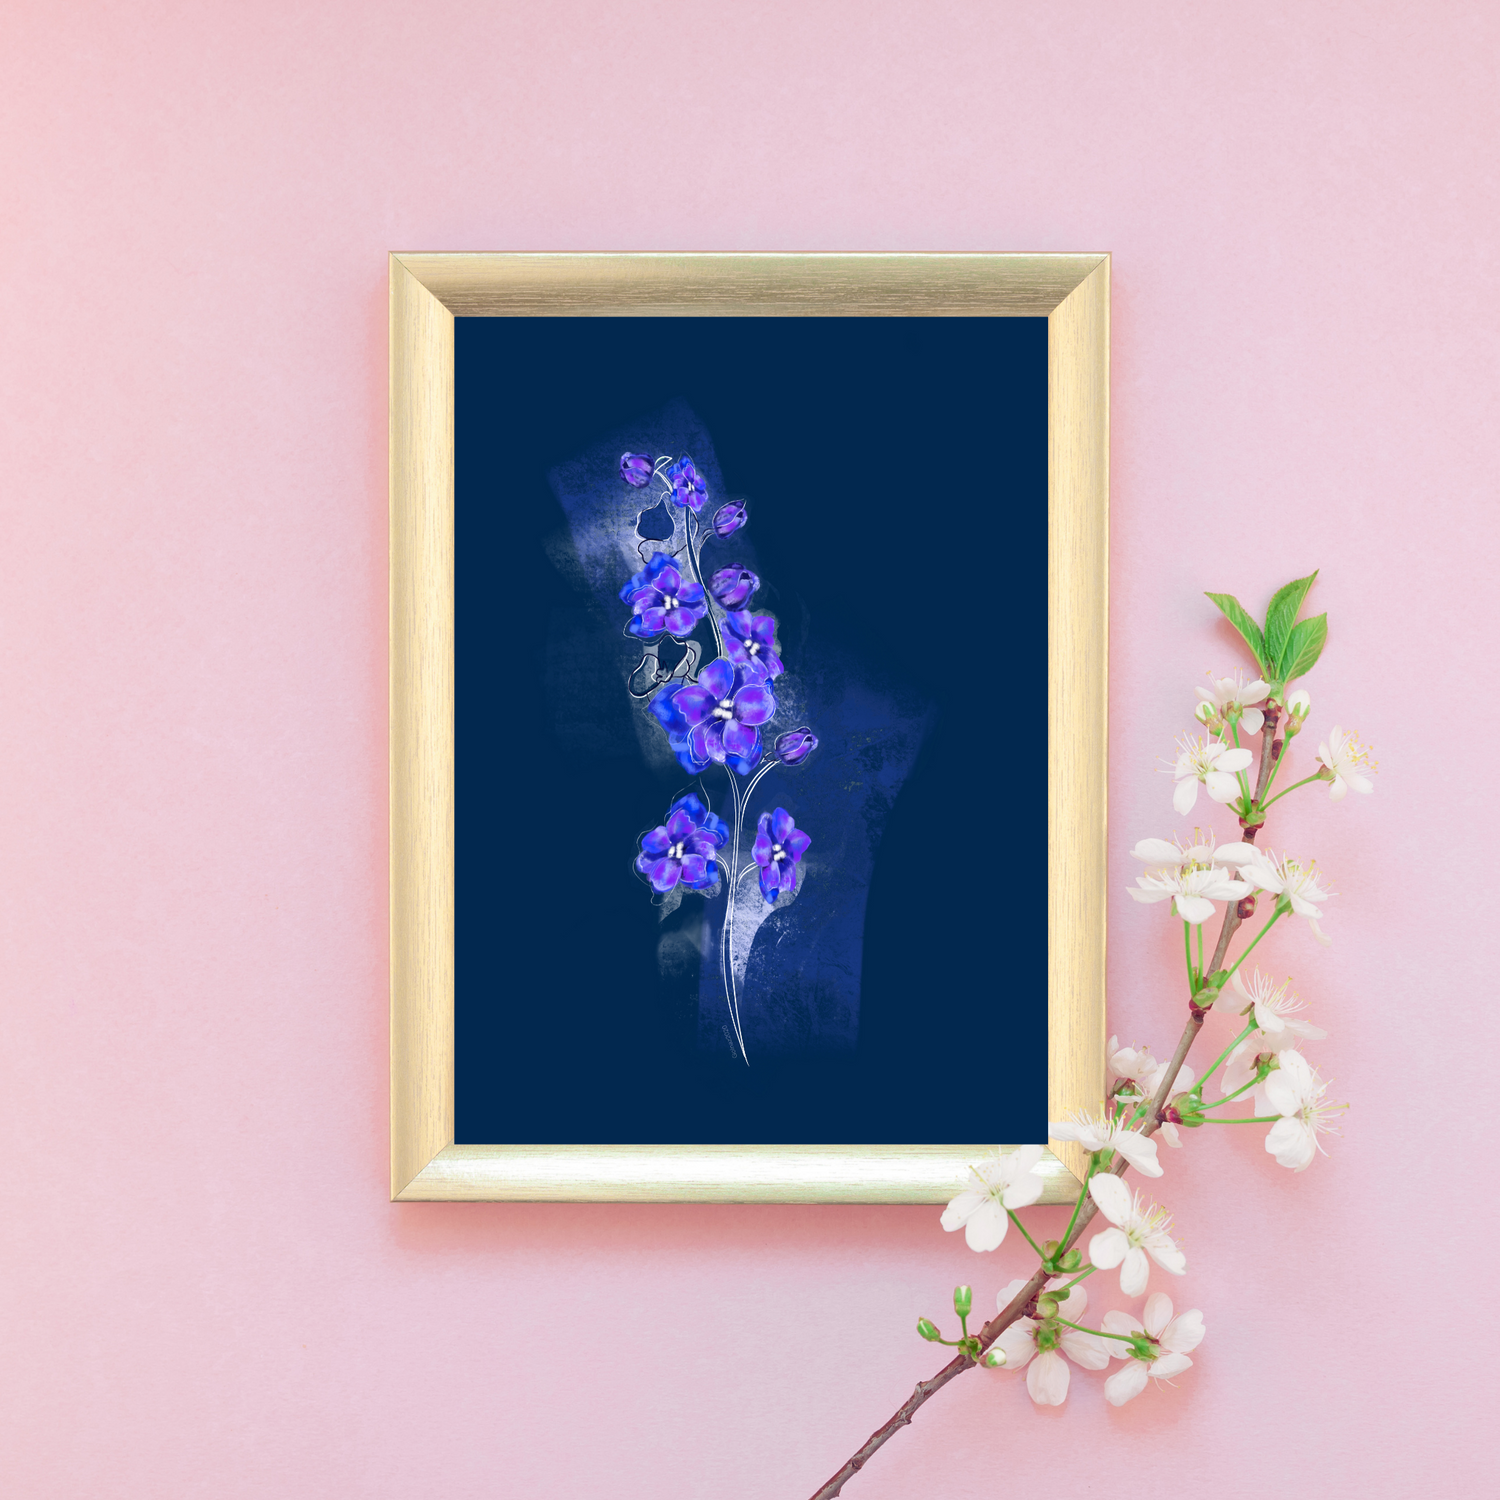 An example of the Larkspur painting by ArisaTeam in a frame on a wall with a branch of flowers